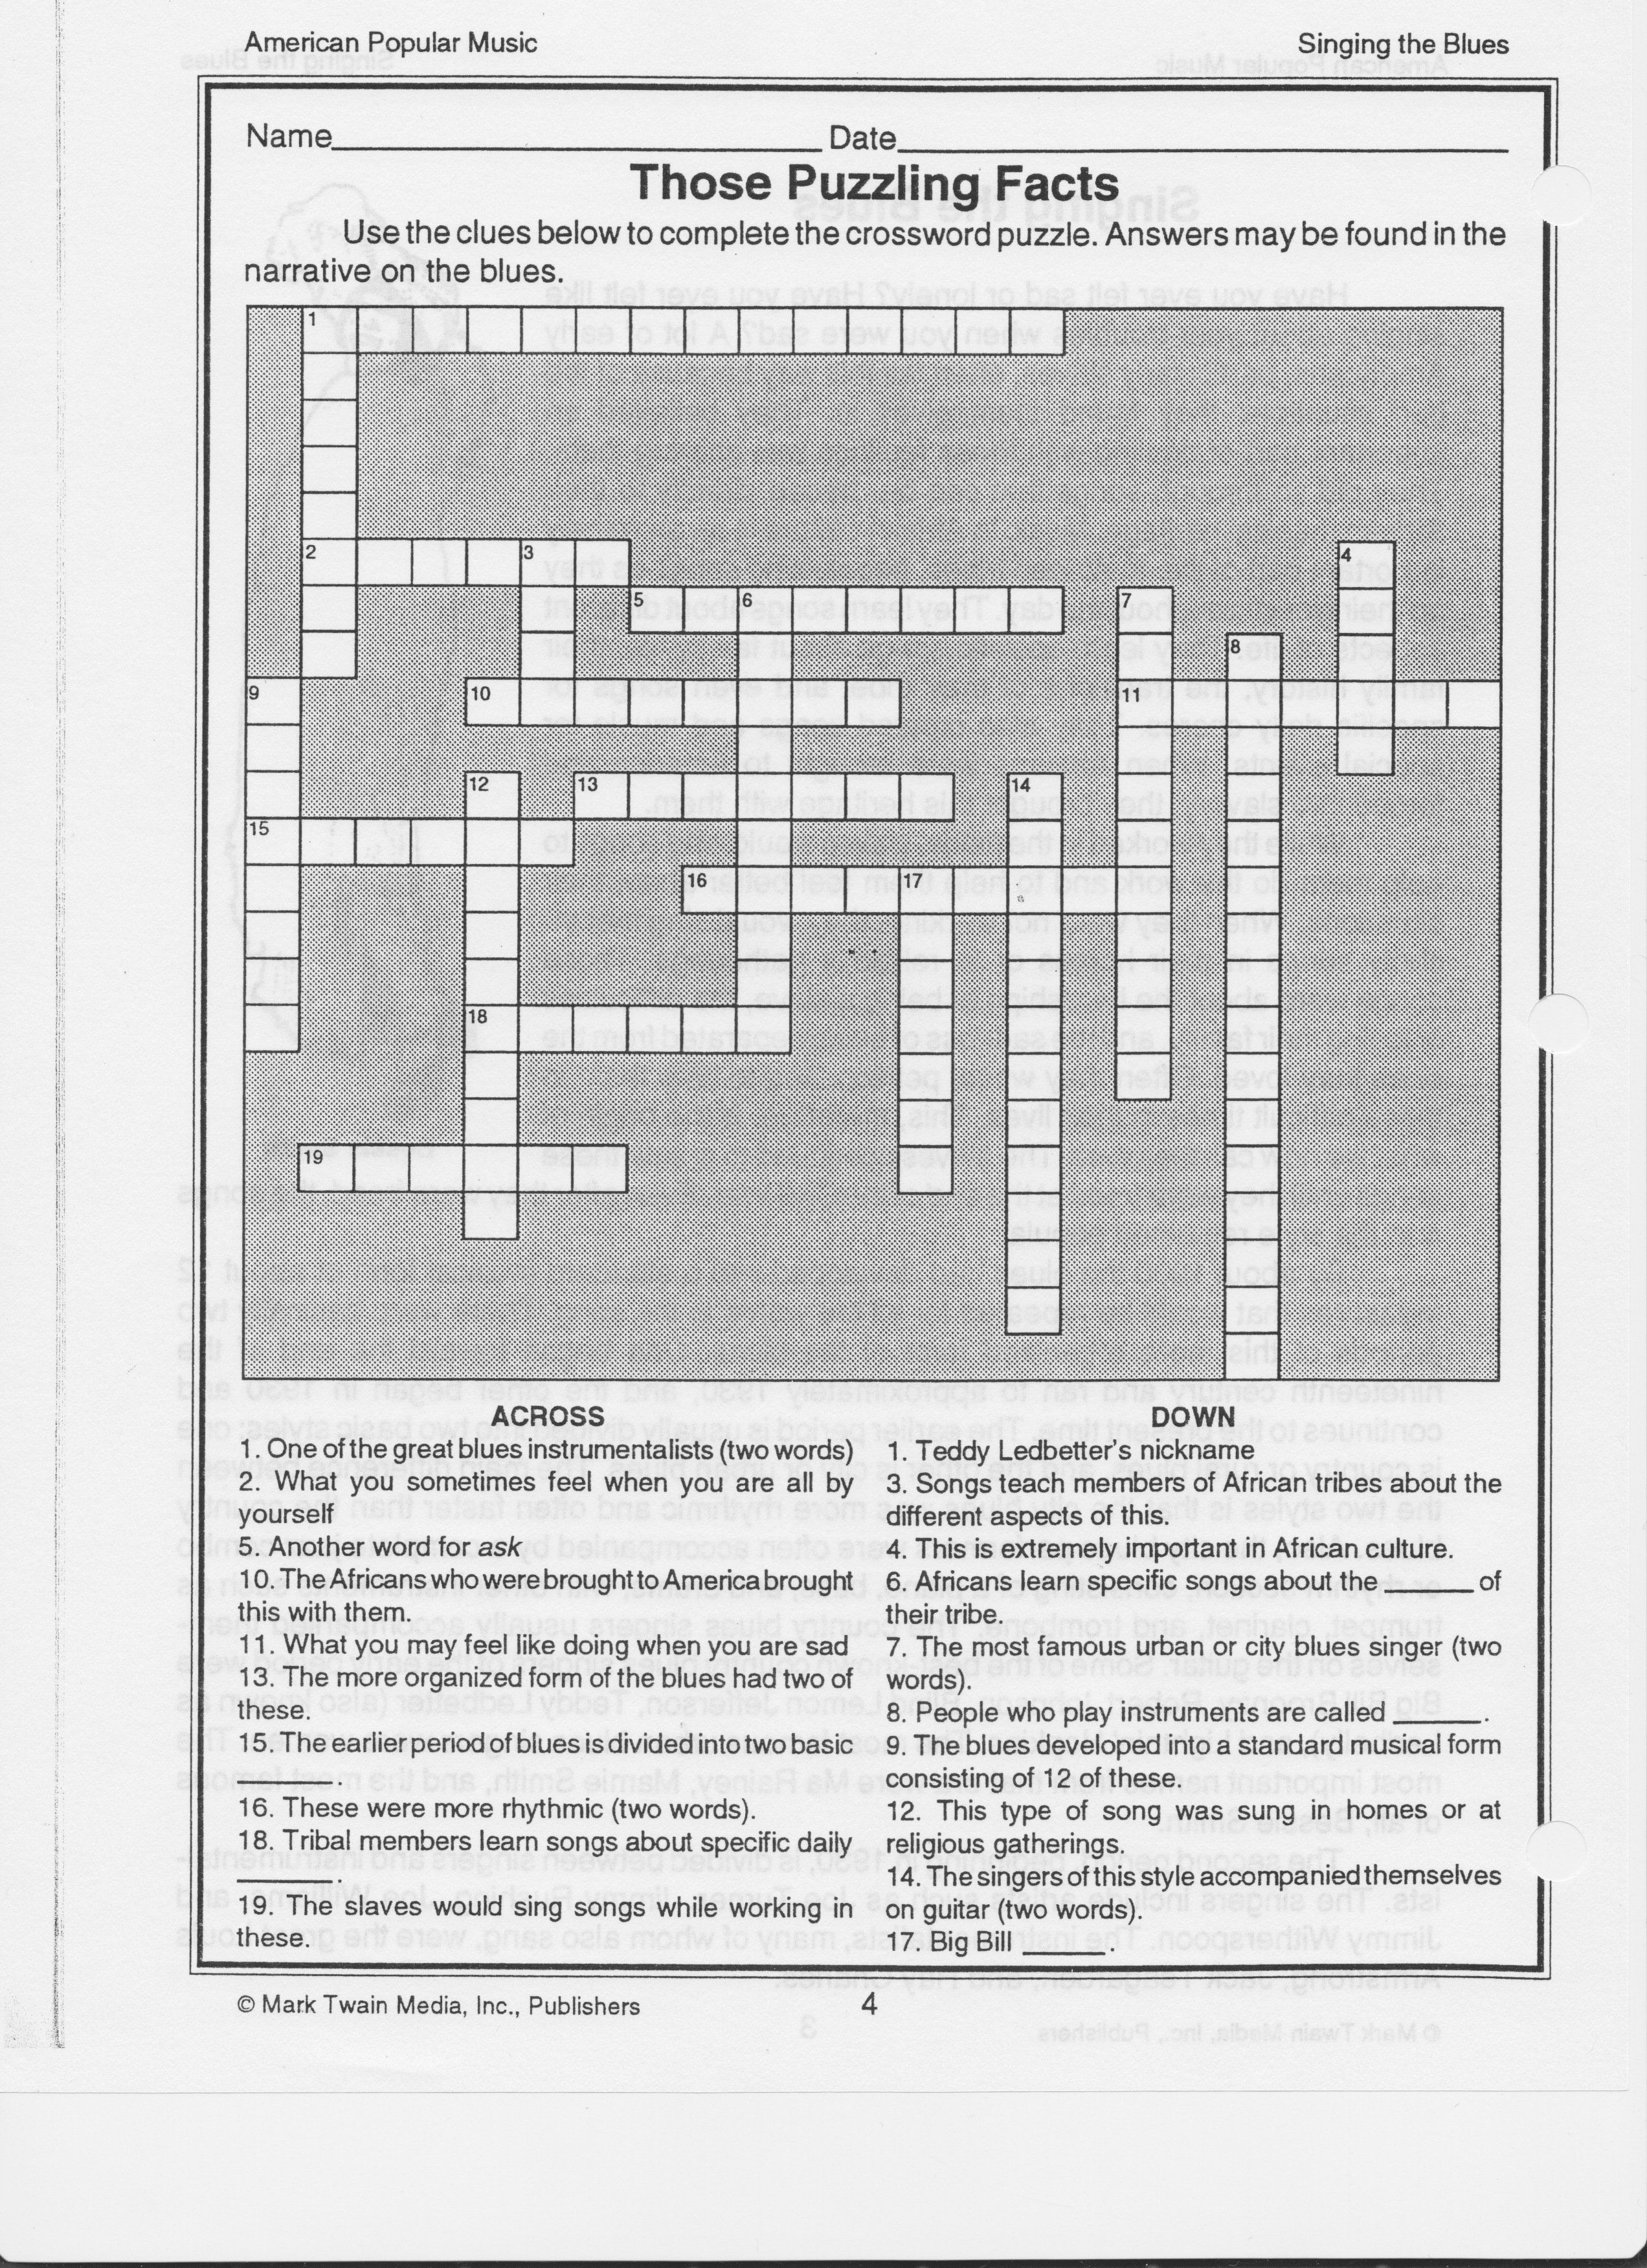 Abbot reccomend Slow in music crossword